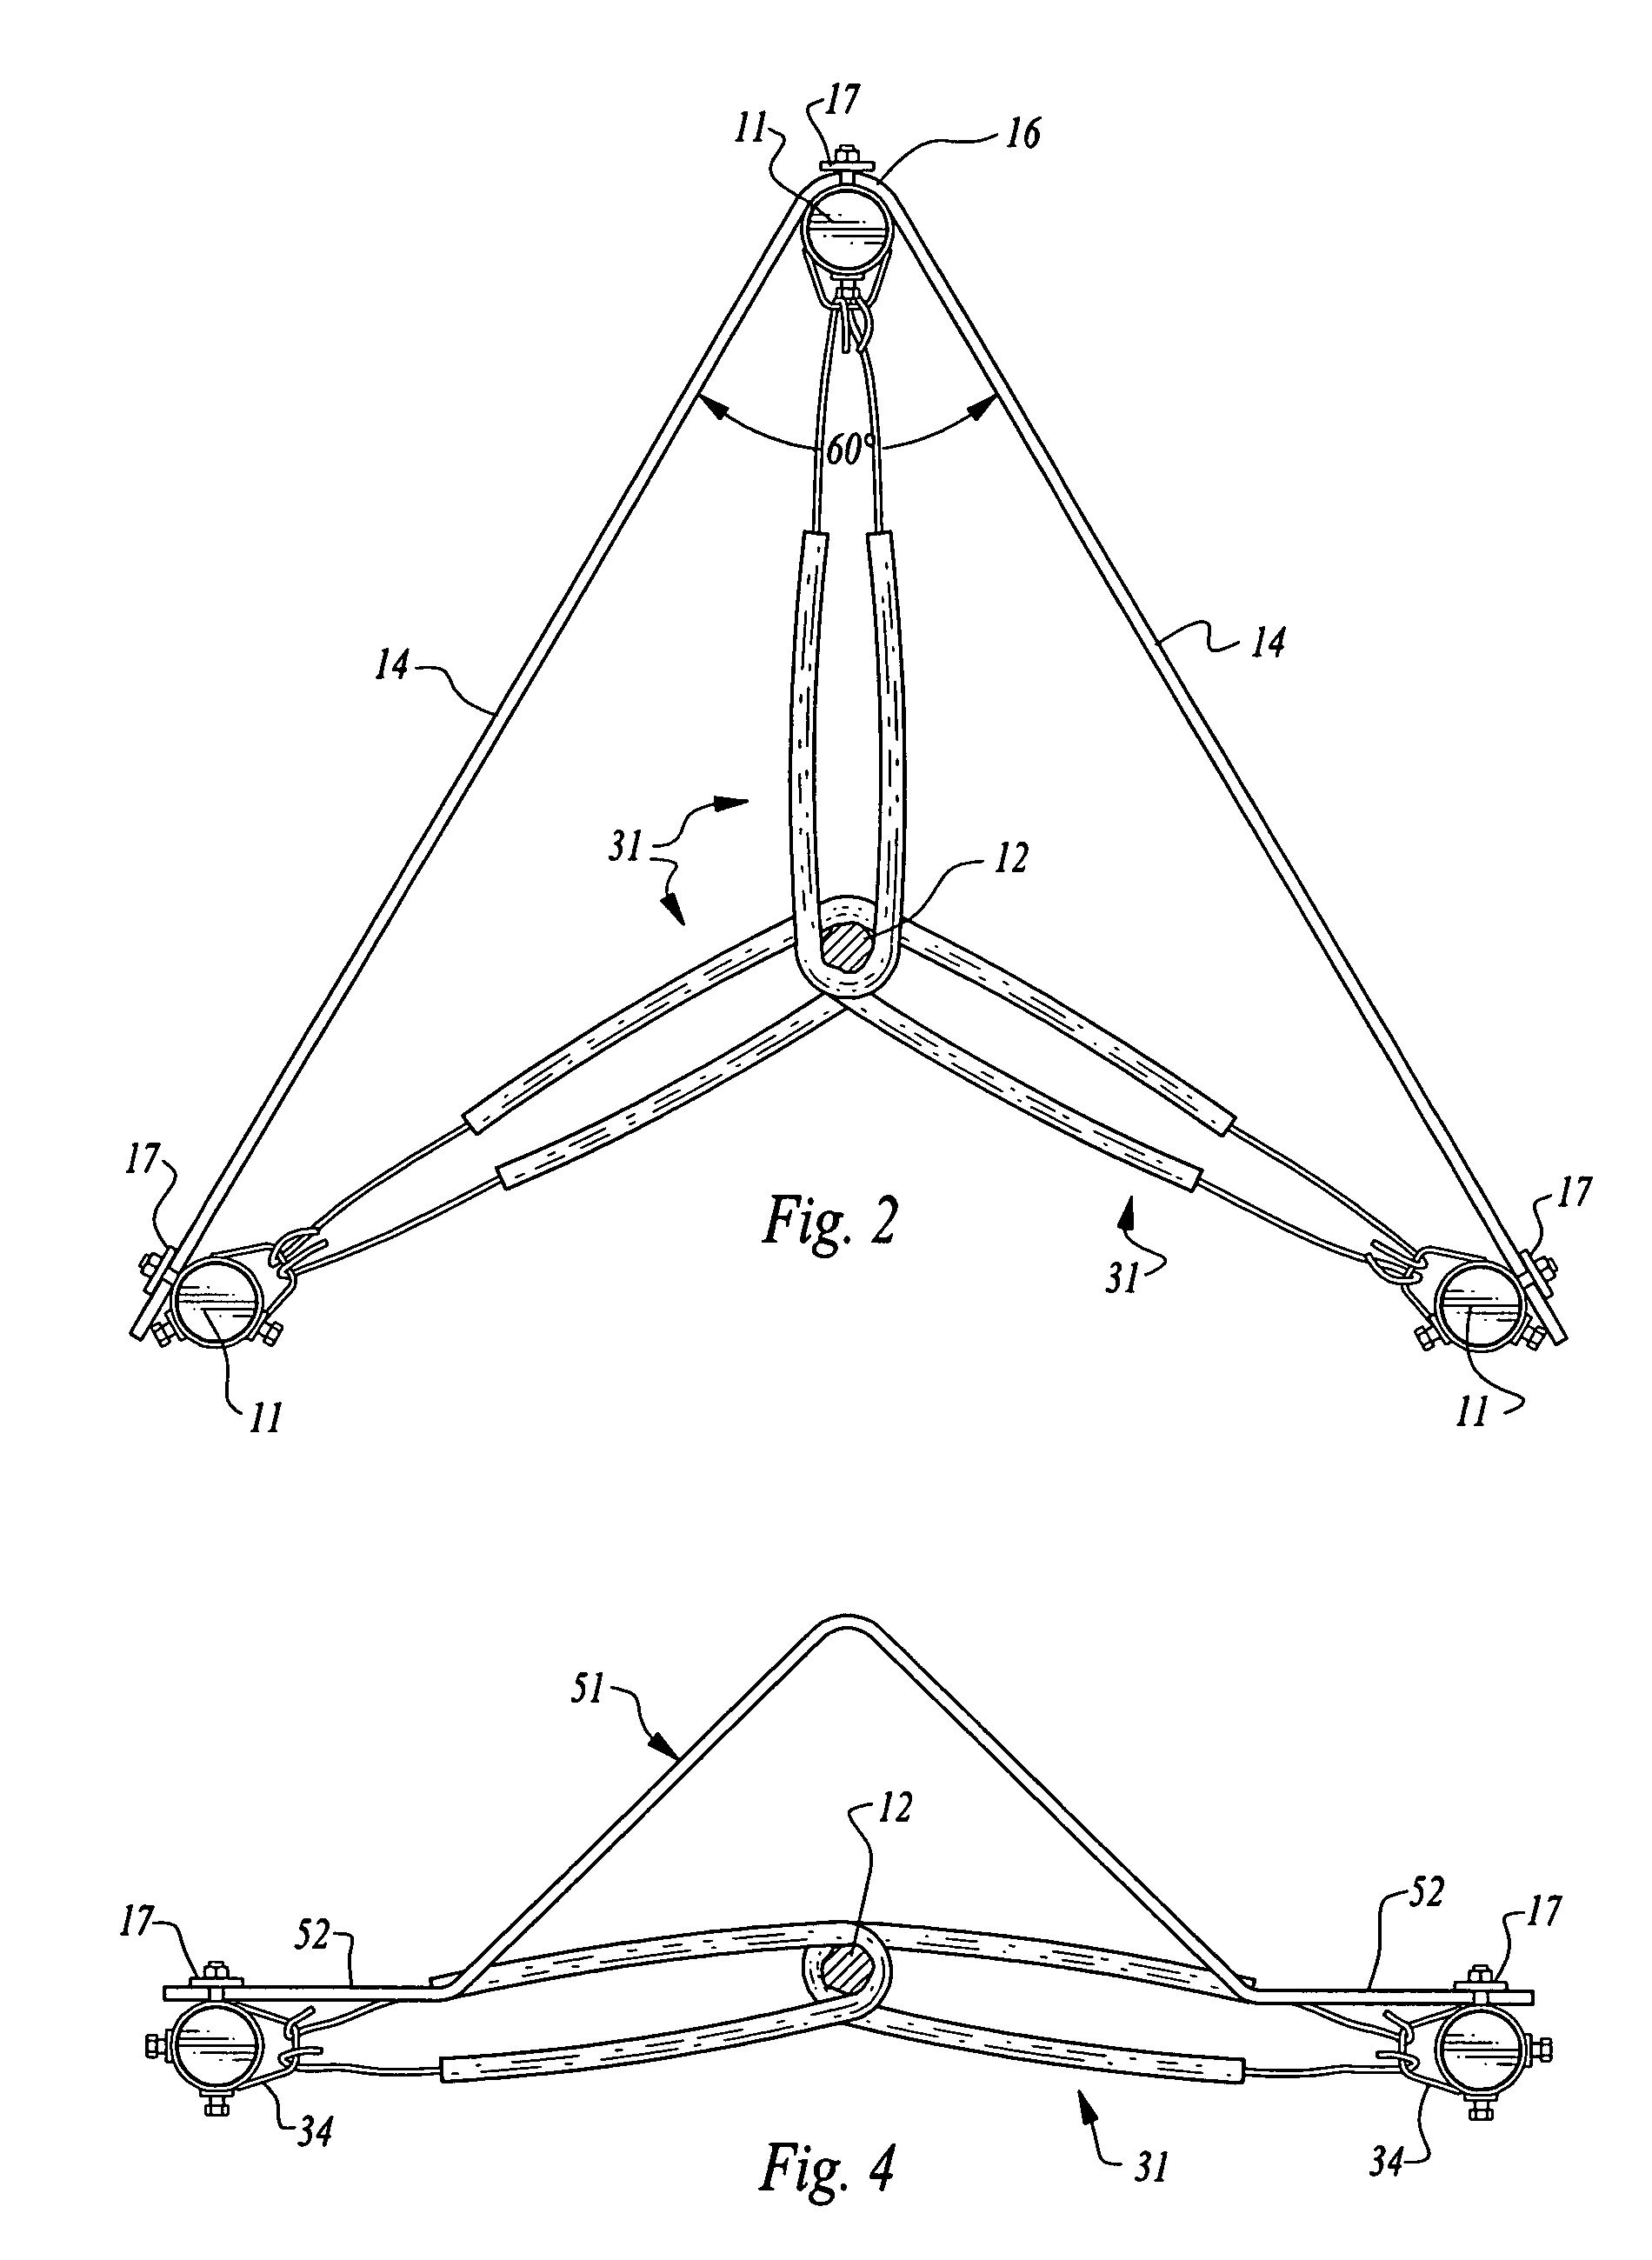 Apparatus for staking trees